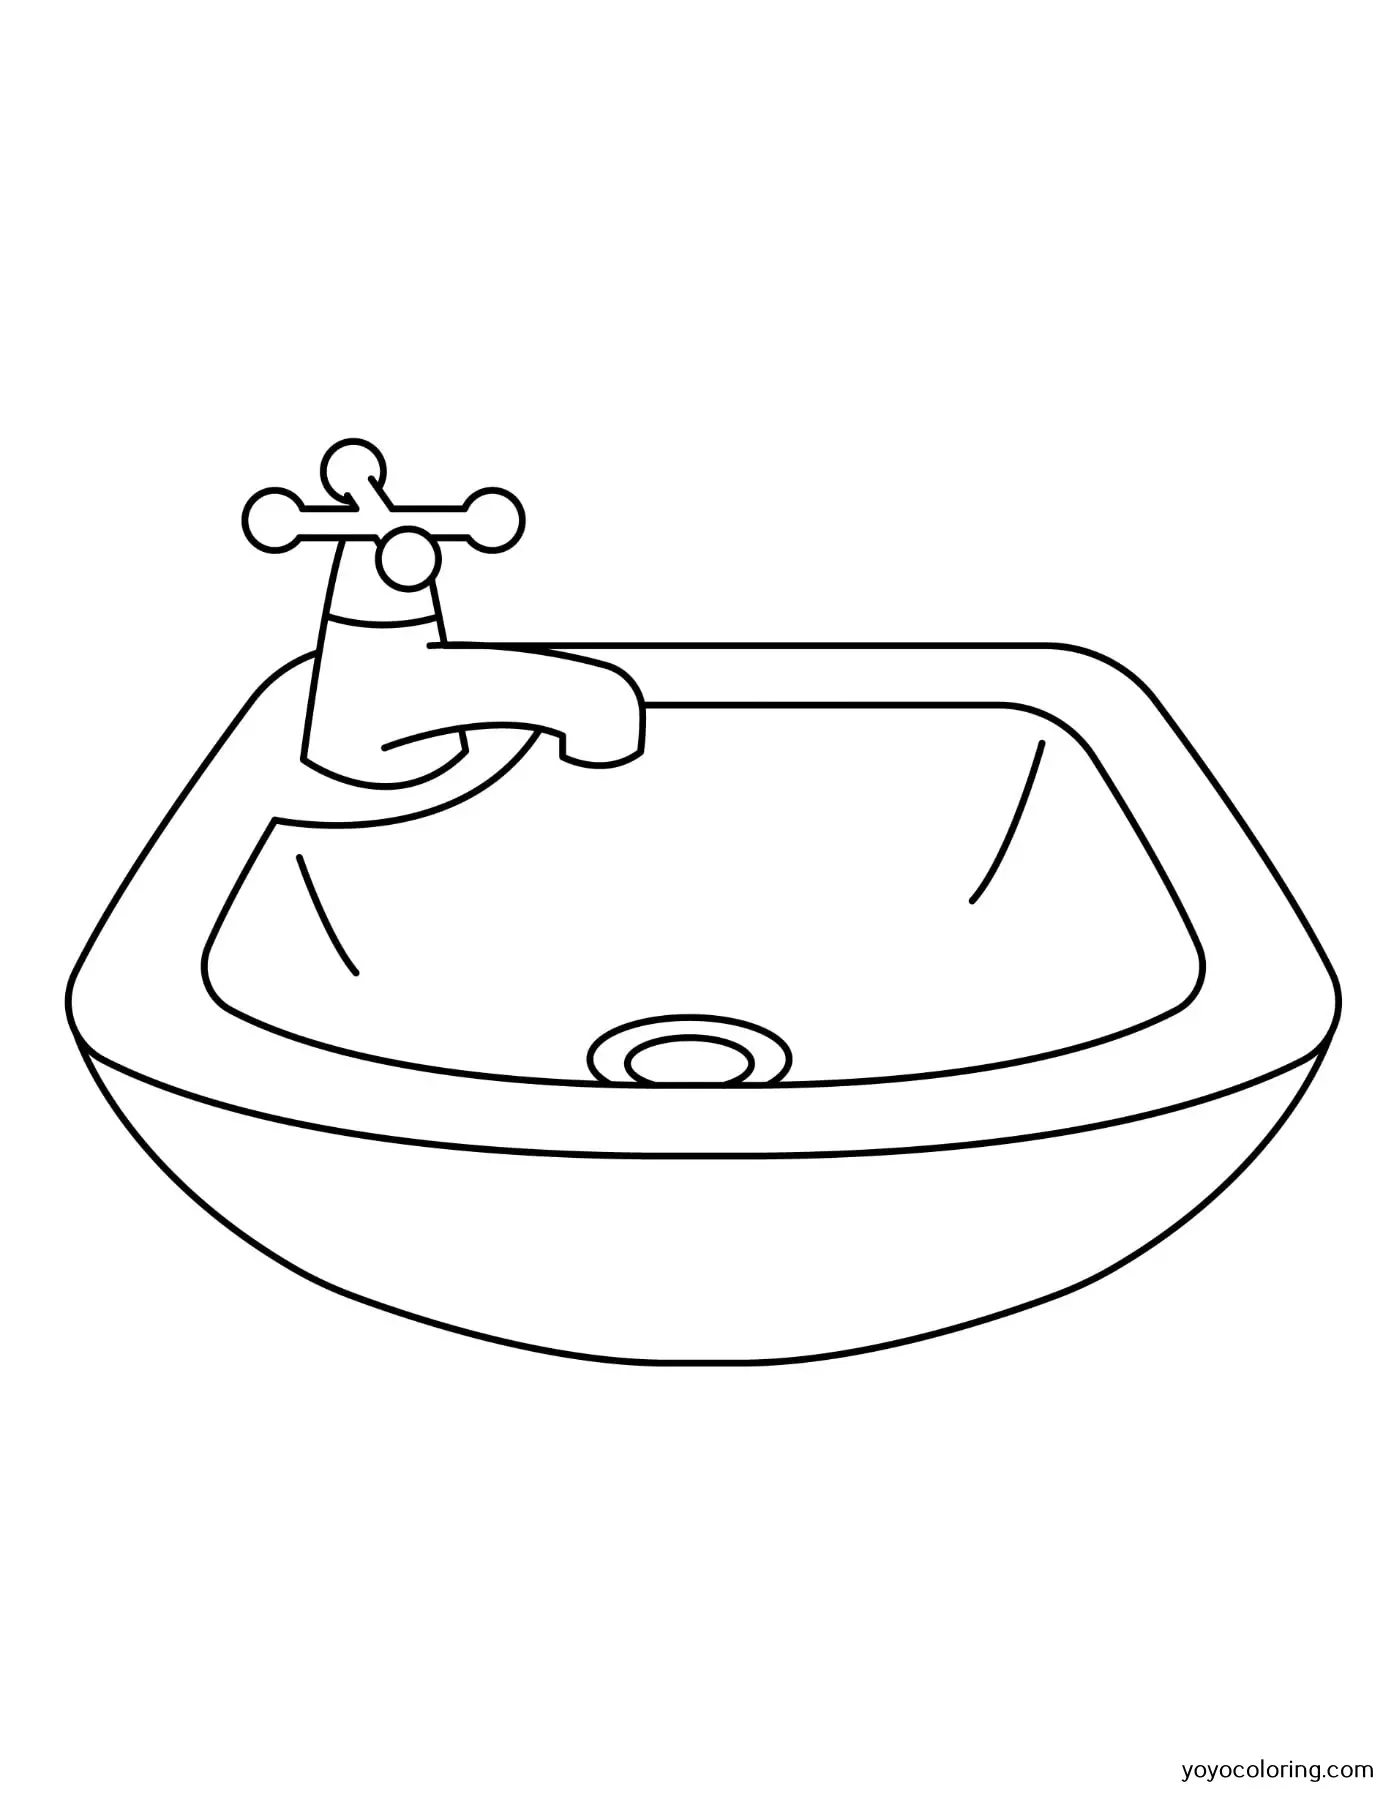 Wash basin coloring pages á printable painting template